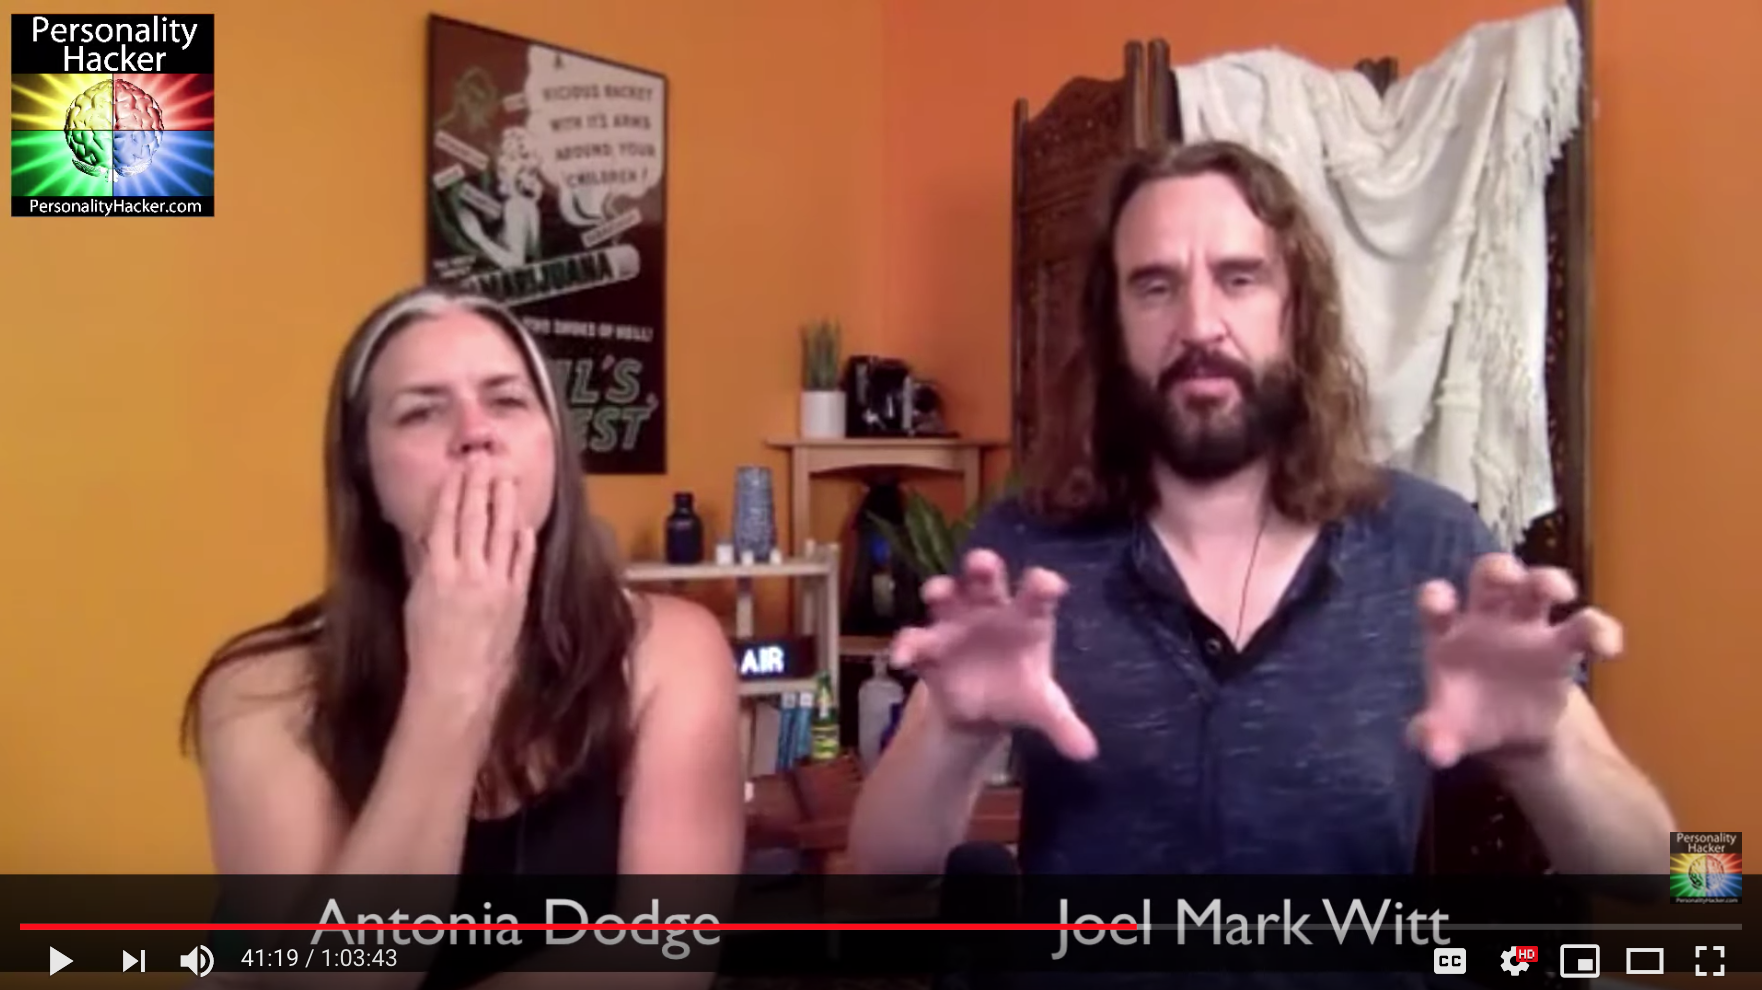 [VIDEO] Test #2 - Joel & Antonia Take Questions From Community Members (live show test)